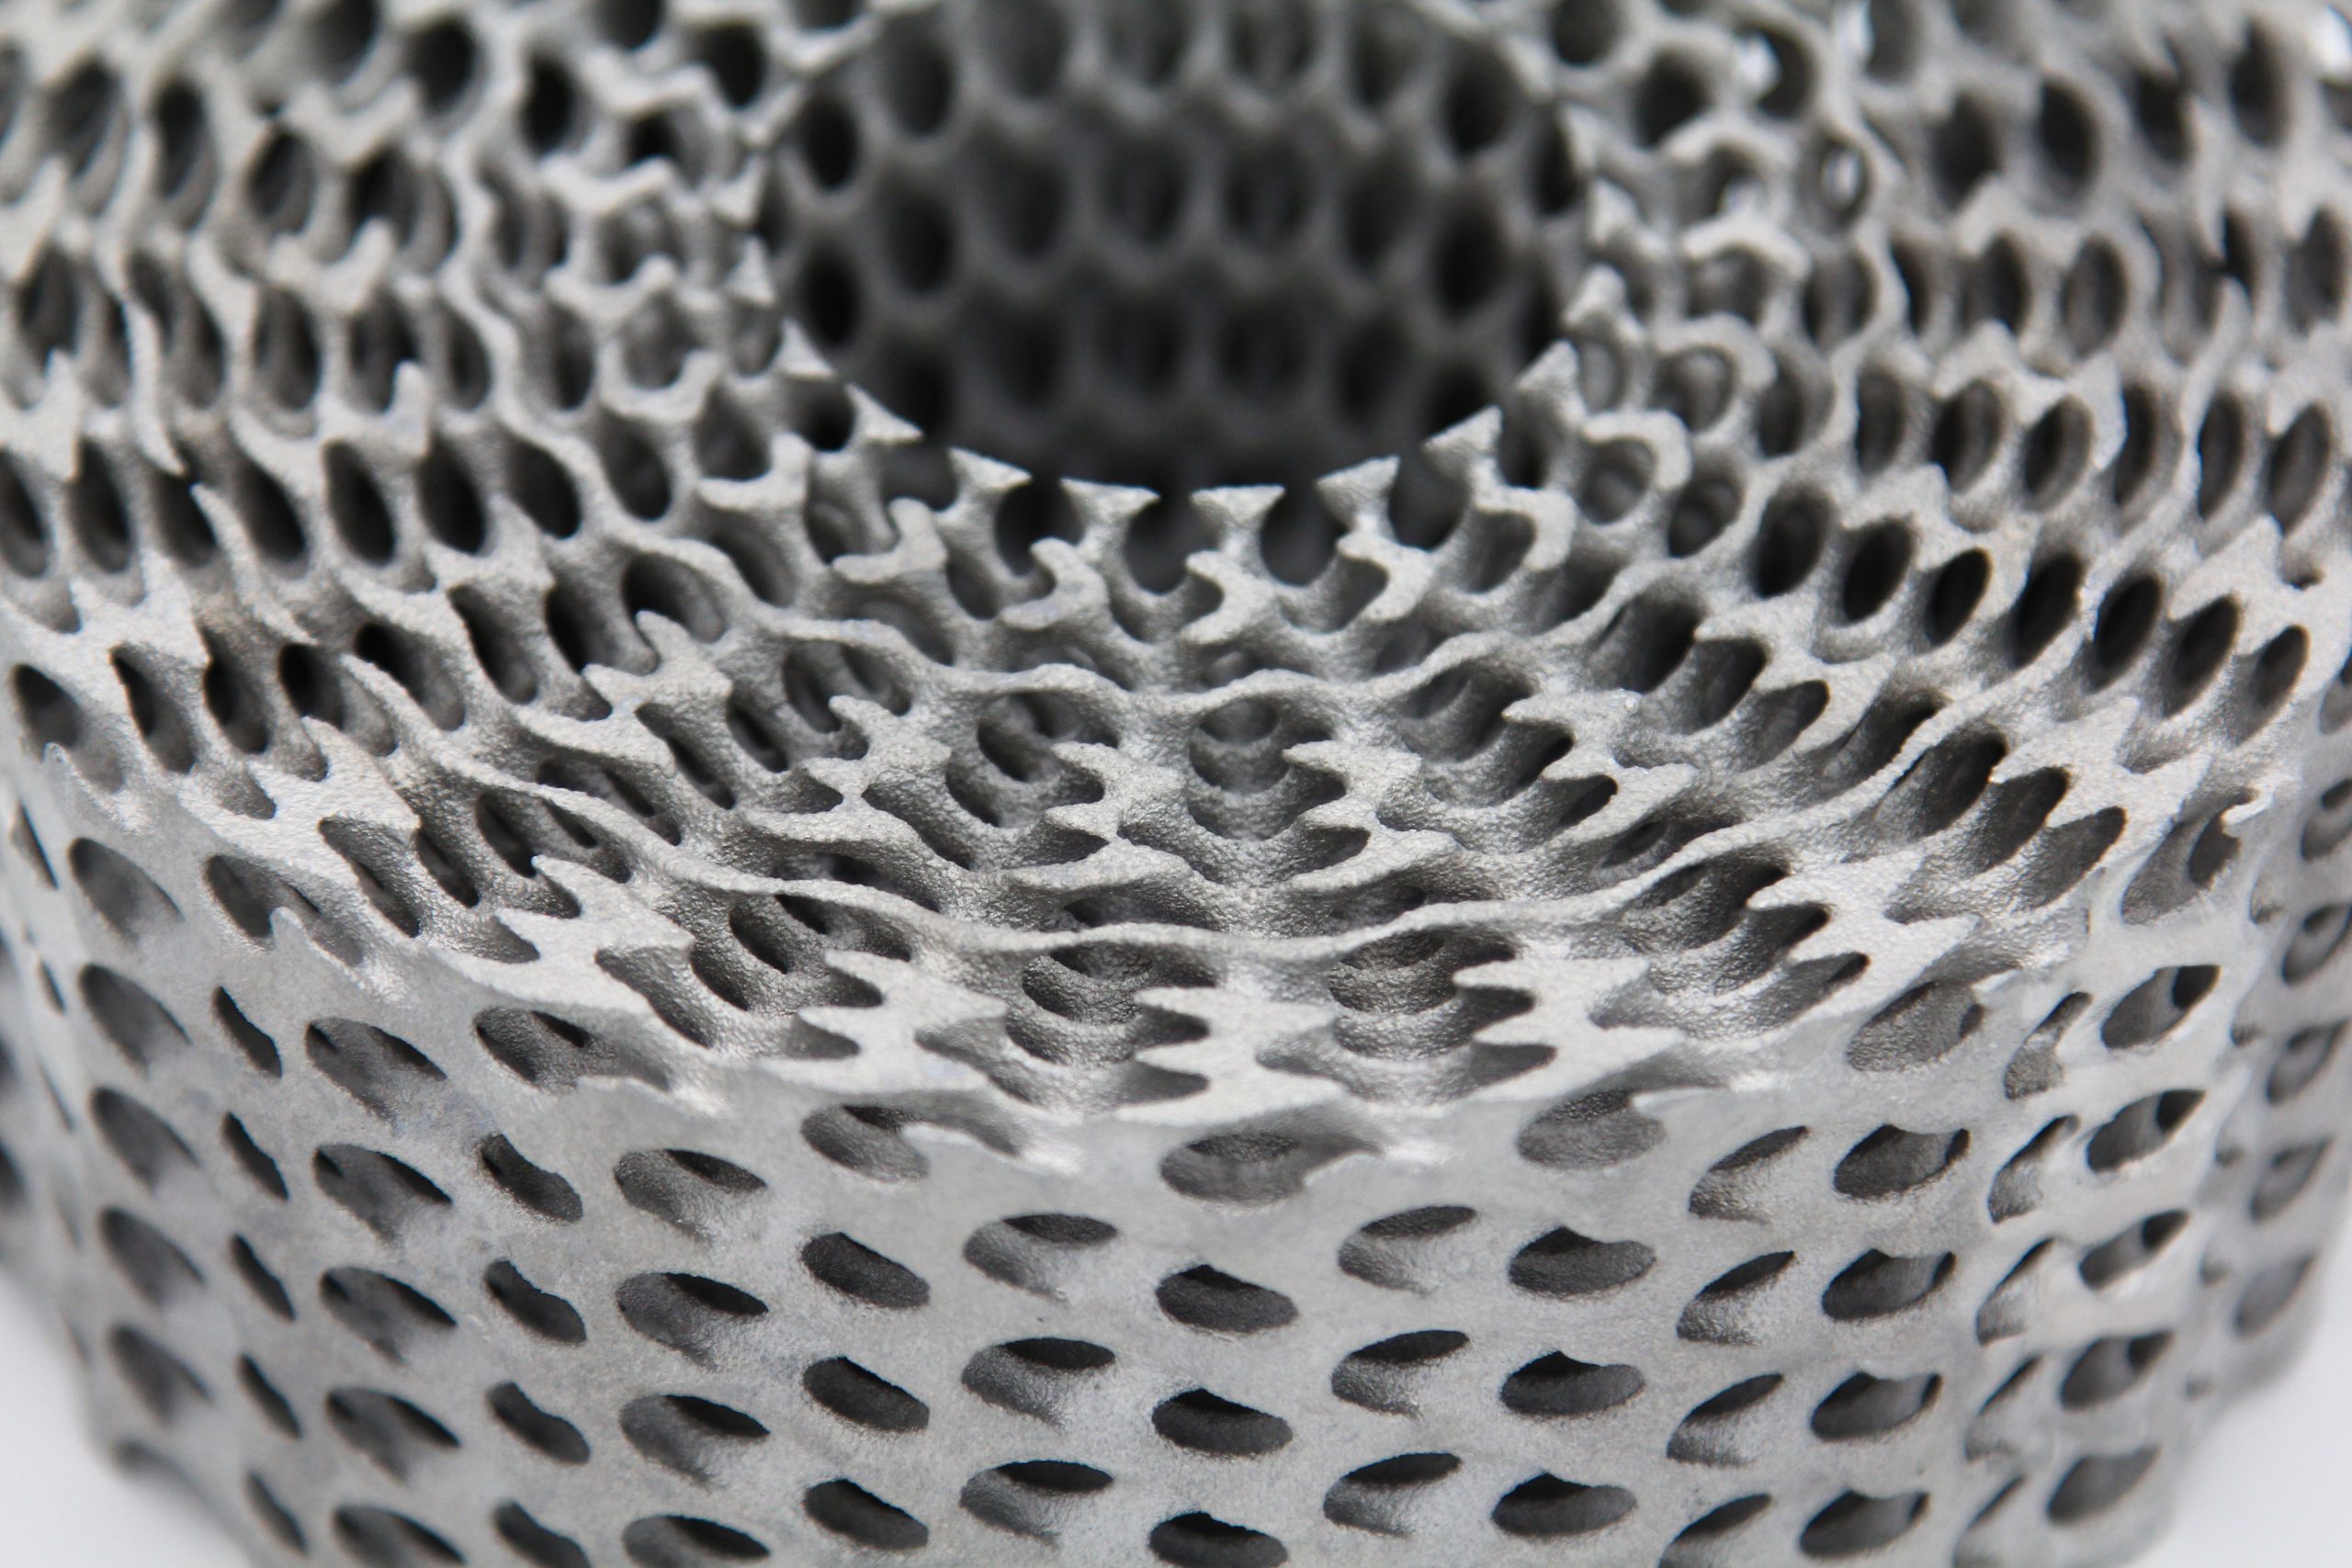 A part made by Enable using the Additive Casting process. Photo via Enable Manufacturing.